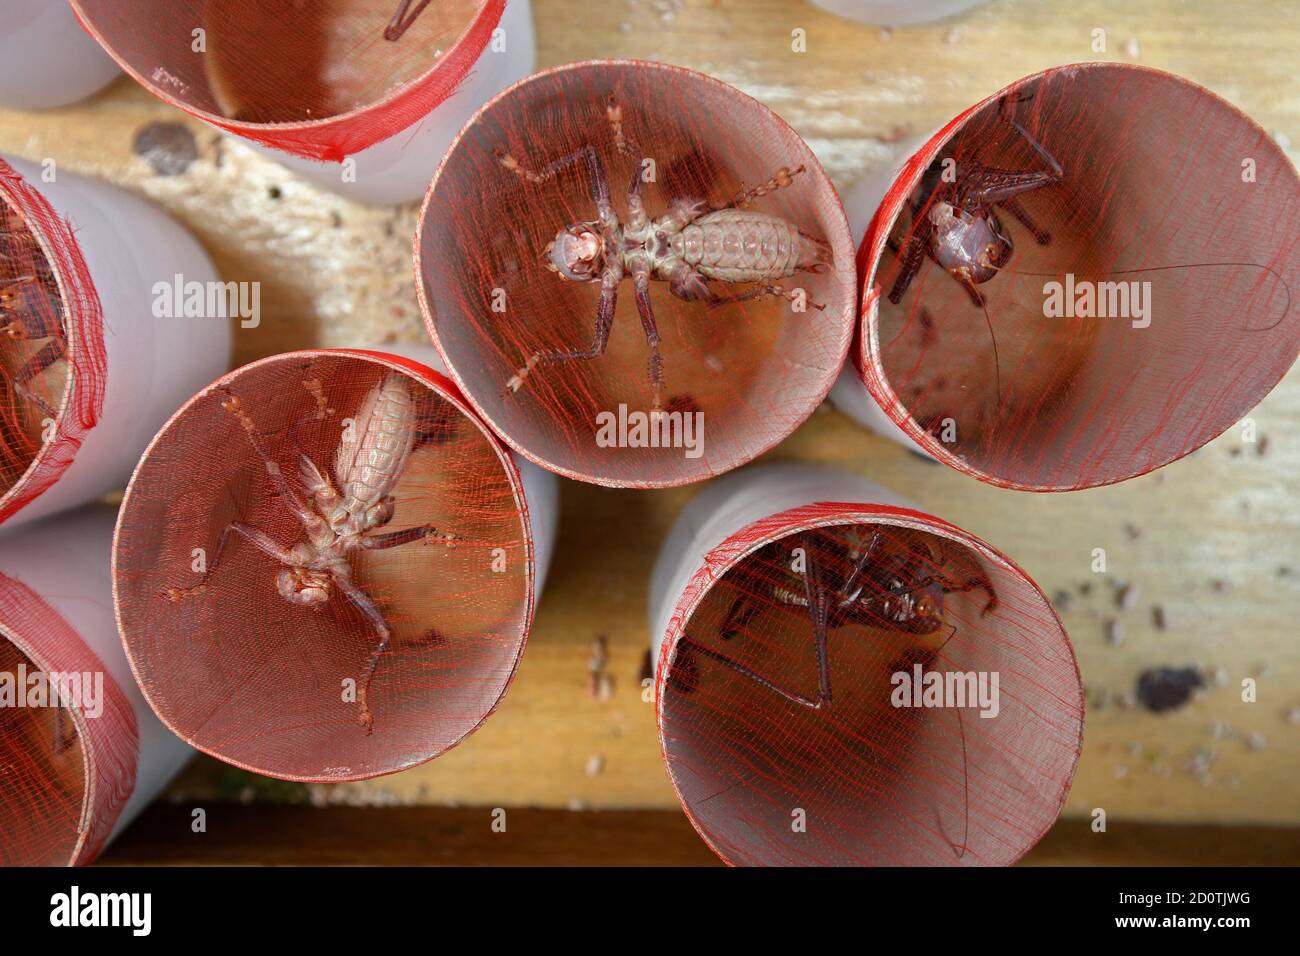 Bush crickets are kept in containers as they are displayed for sale at an insect market in Beijing September 9, 2013. Keeping crickets as singing pets is an old Chinese tradition. Picture taken September 9, 2013.  REUTERS/Kim Kyung-Hoon (CHINA - Tags: SOCIETY ANIMALS) Stock Photo